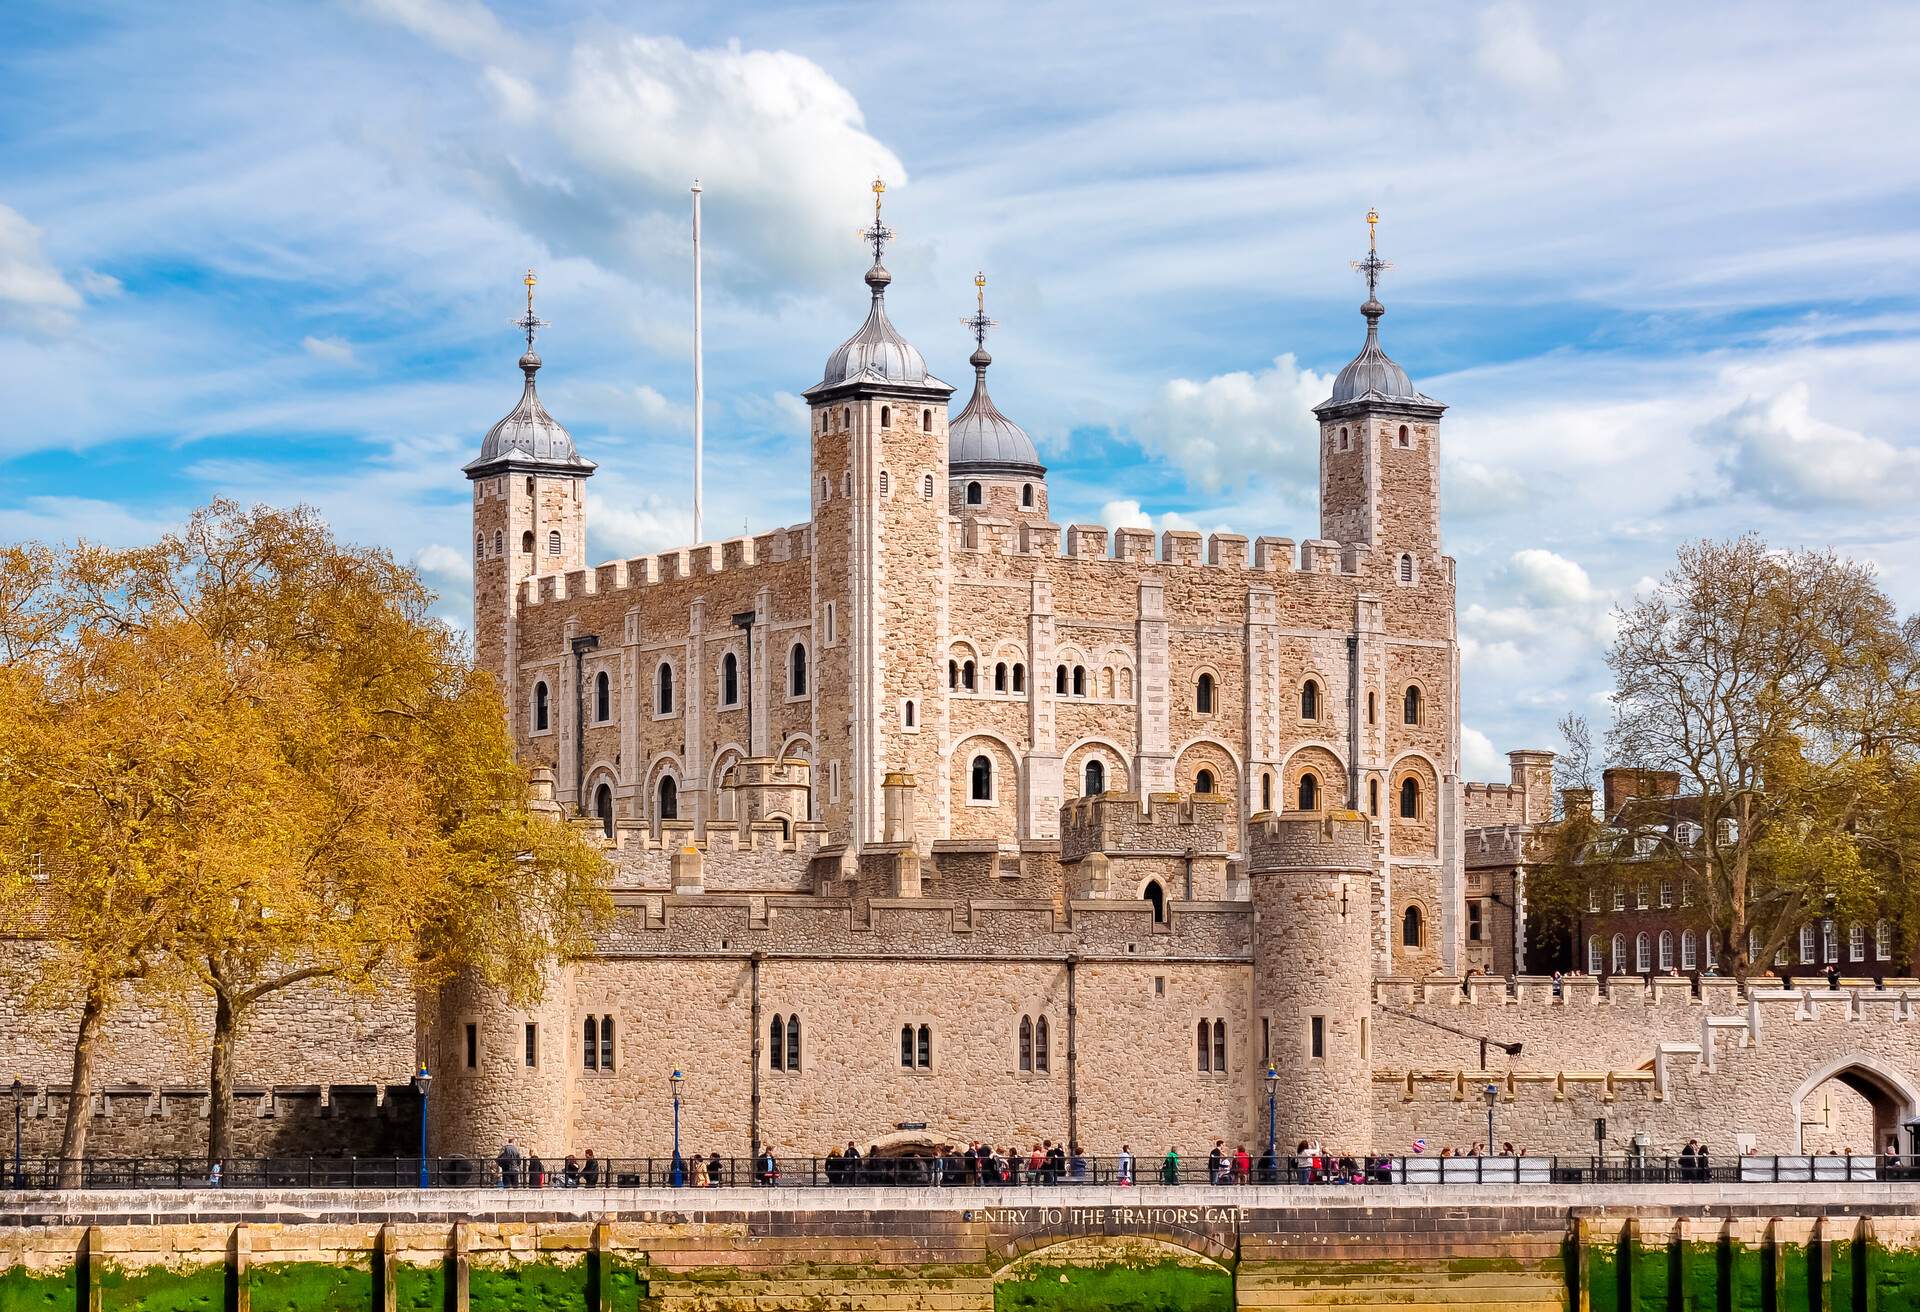 DEST_UK_ENGLAND_LONDON_TOWER OF LONDON_GettyImages-1010022764